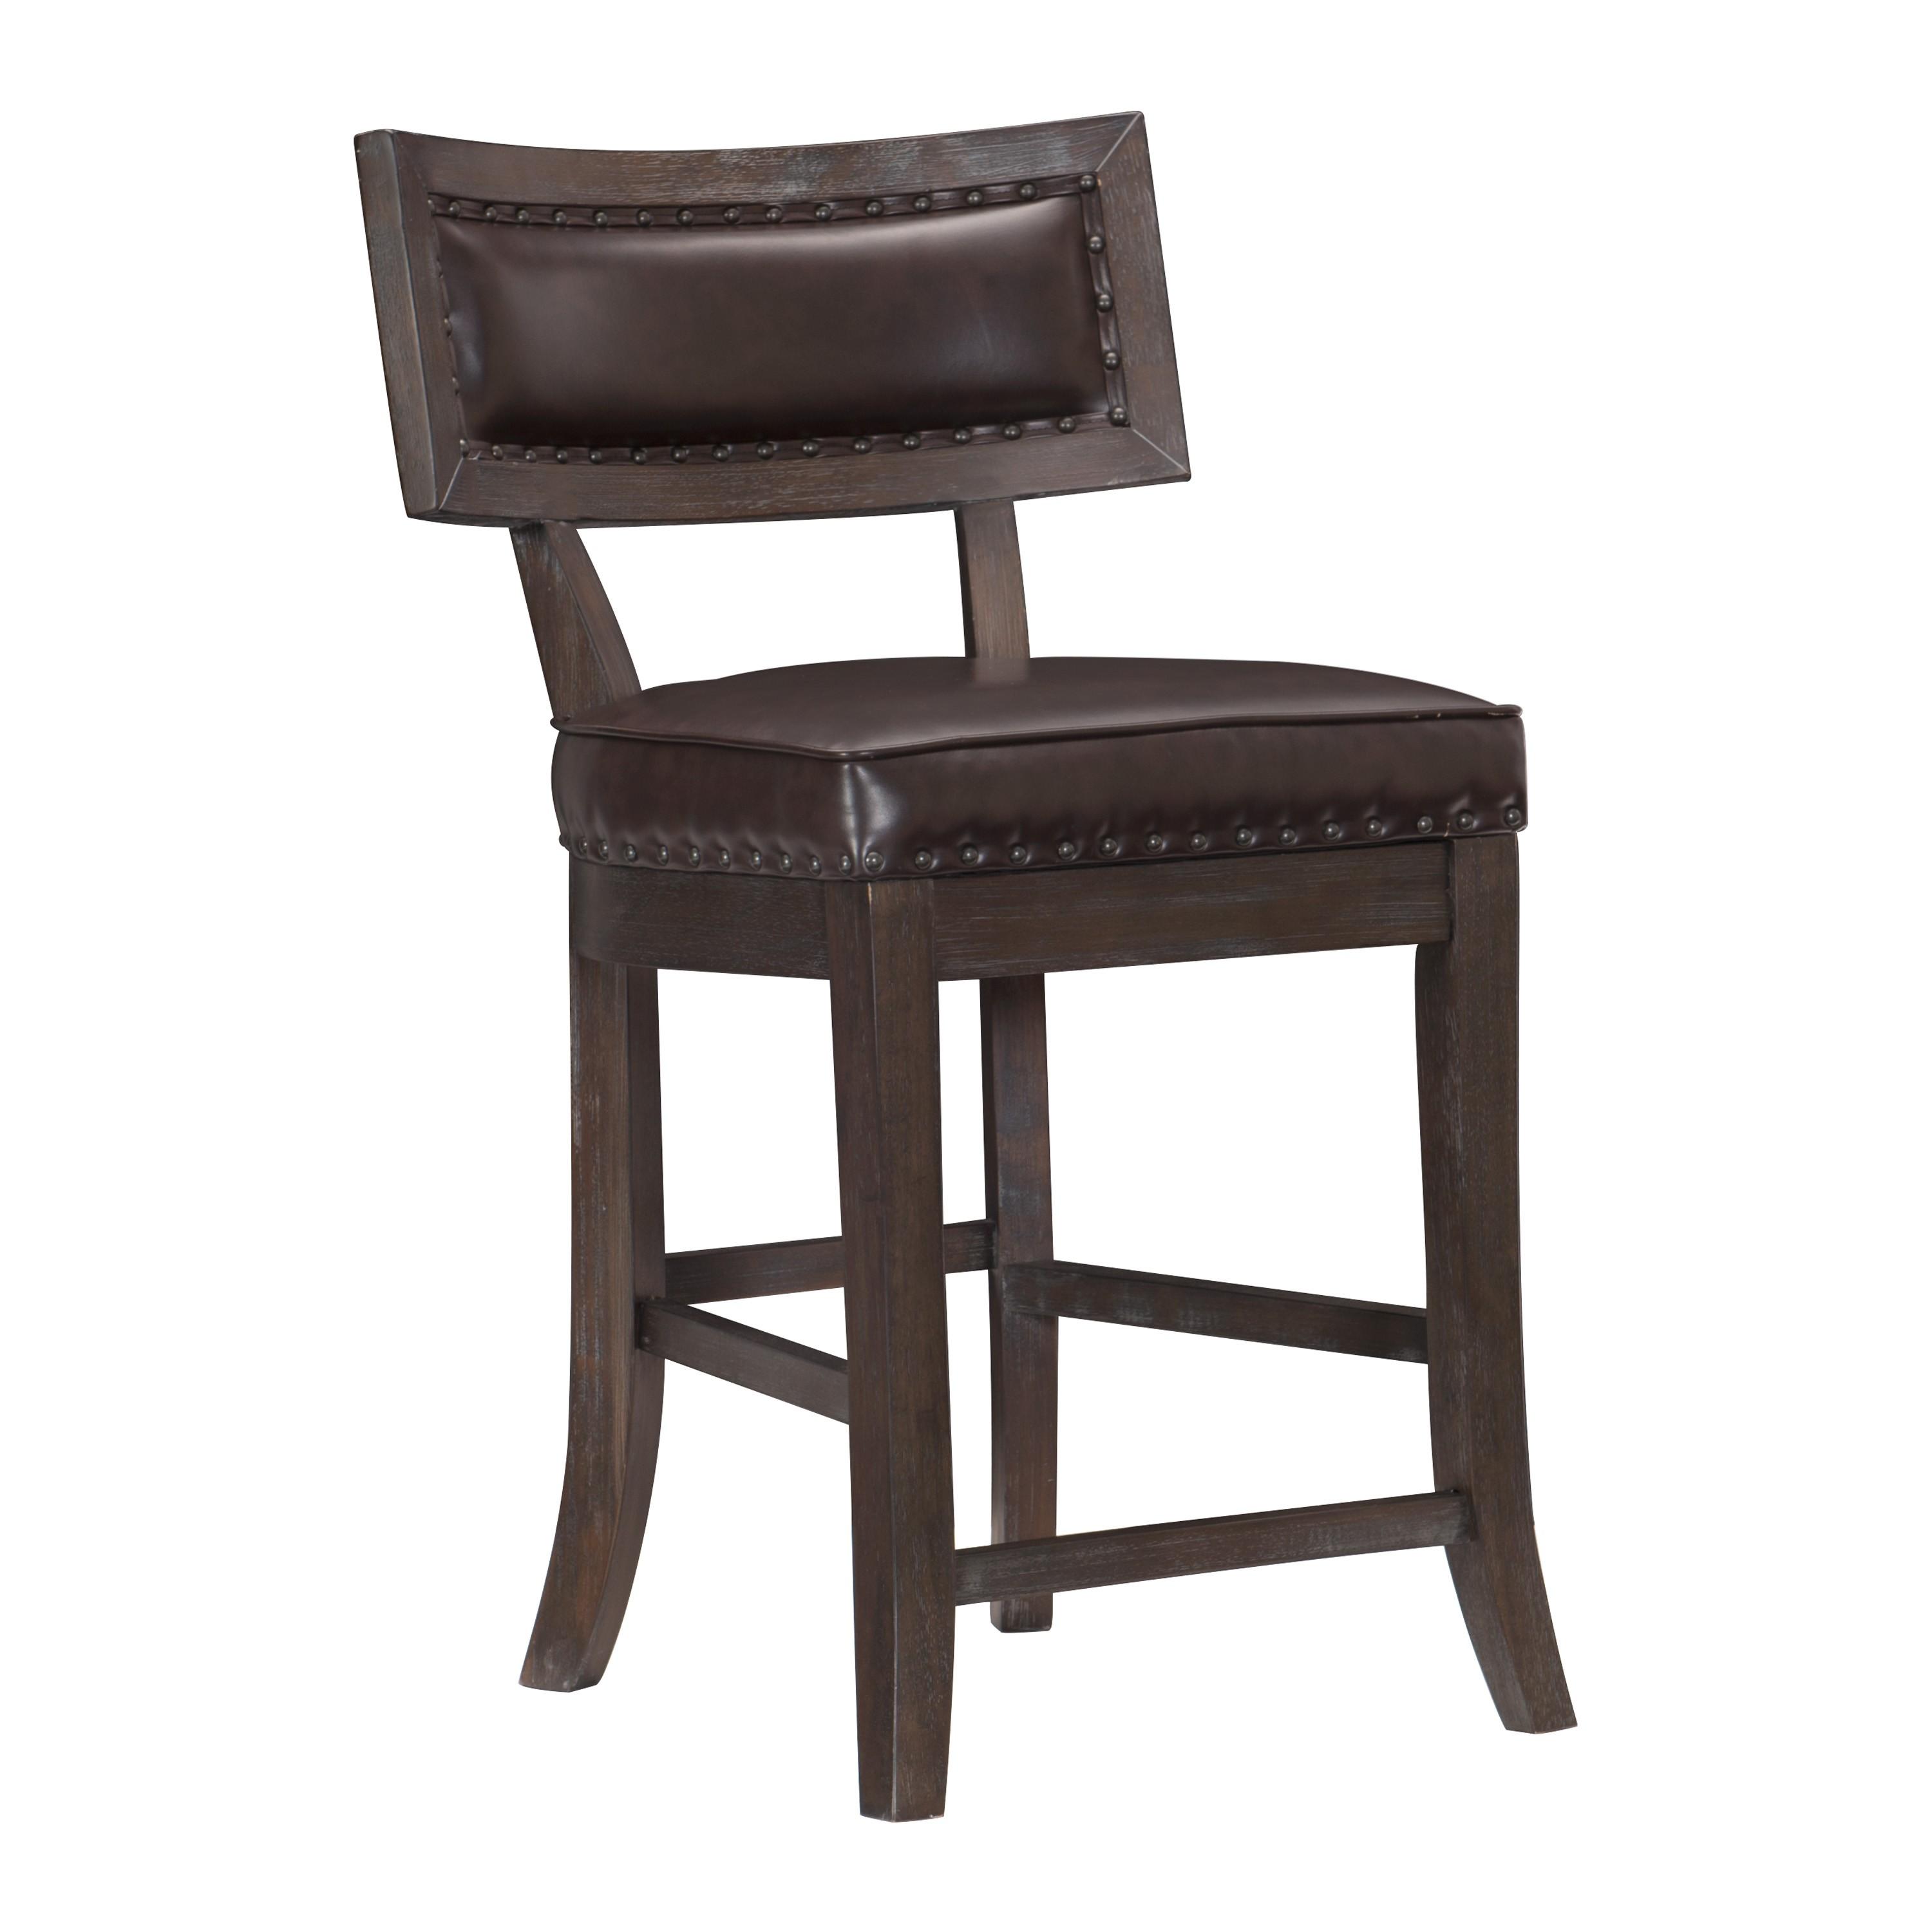 Rustic Counter Height Chair 5655-24 Oxton 5655-24 in Dark Cherry Faux Leather